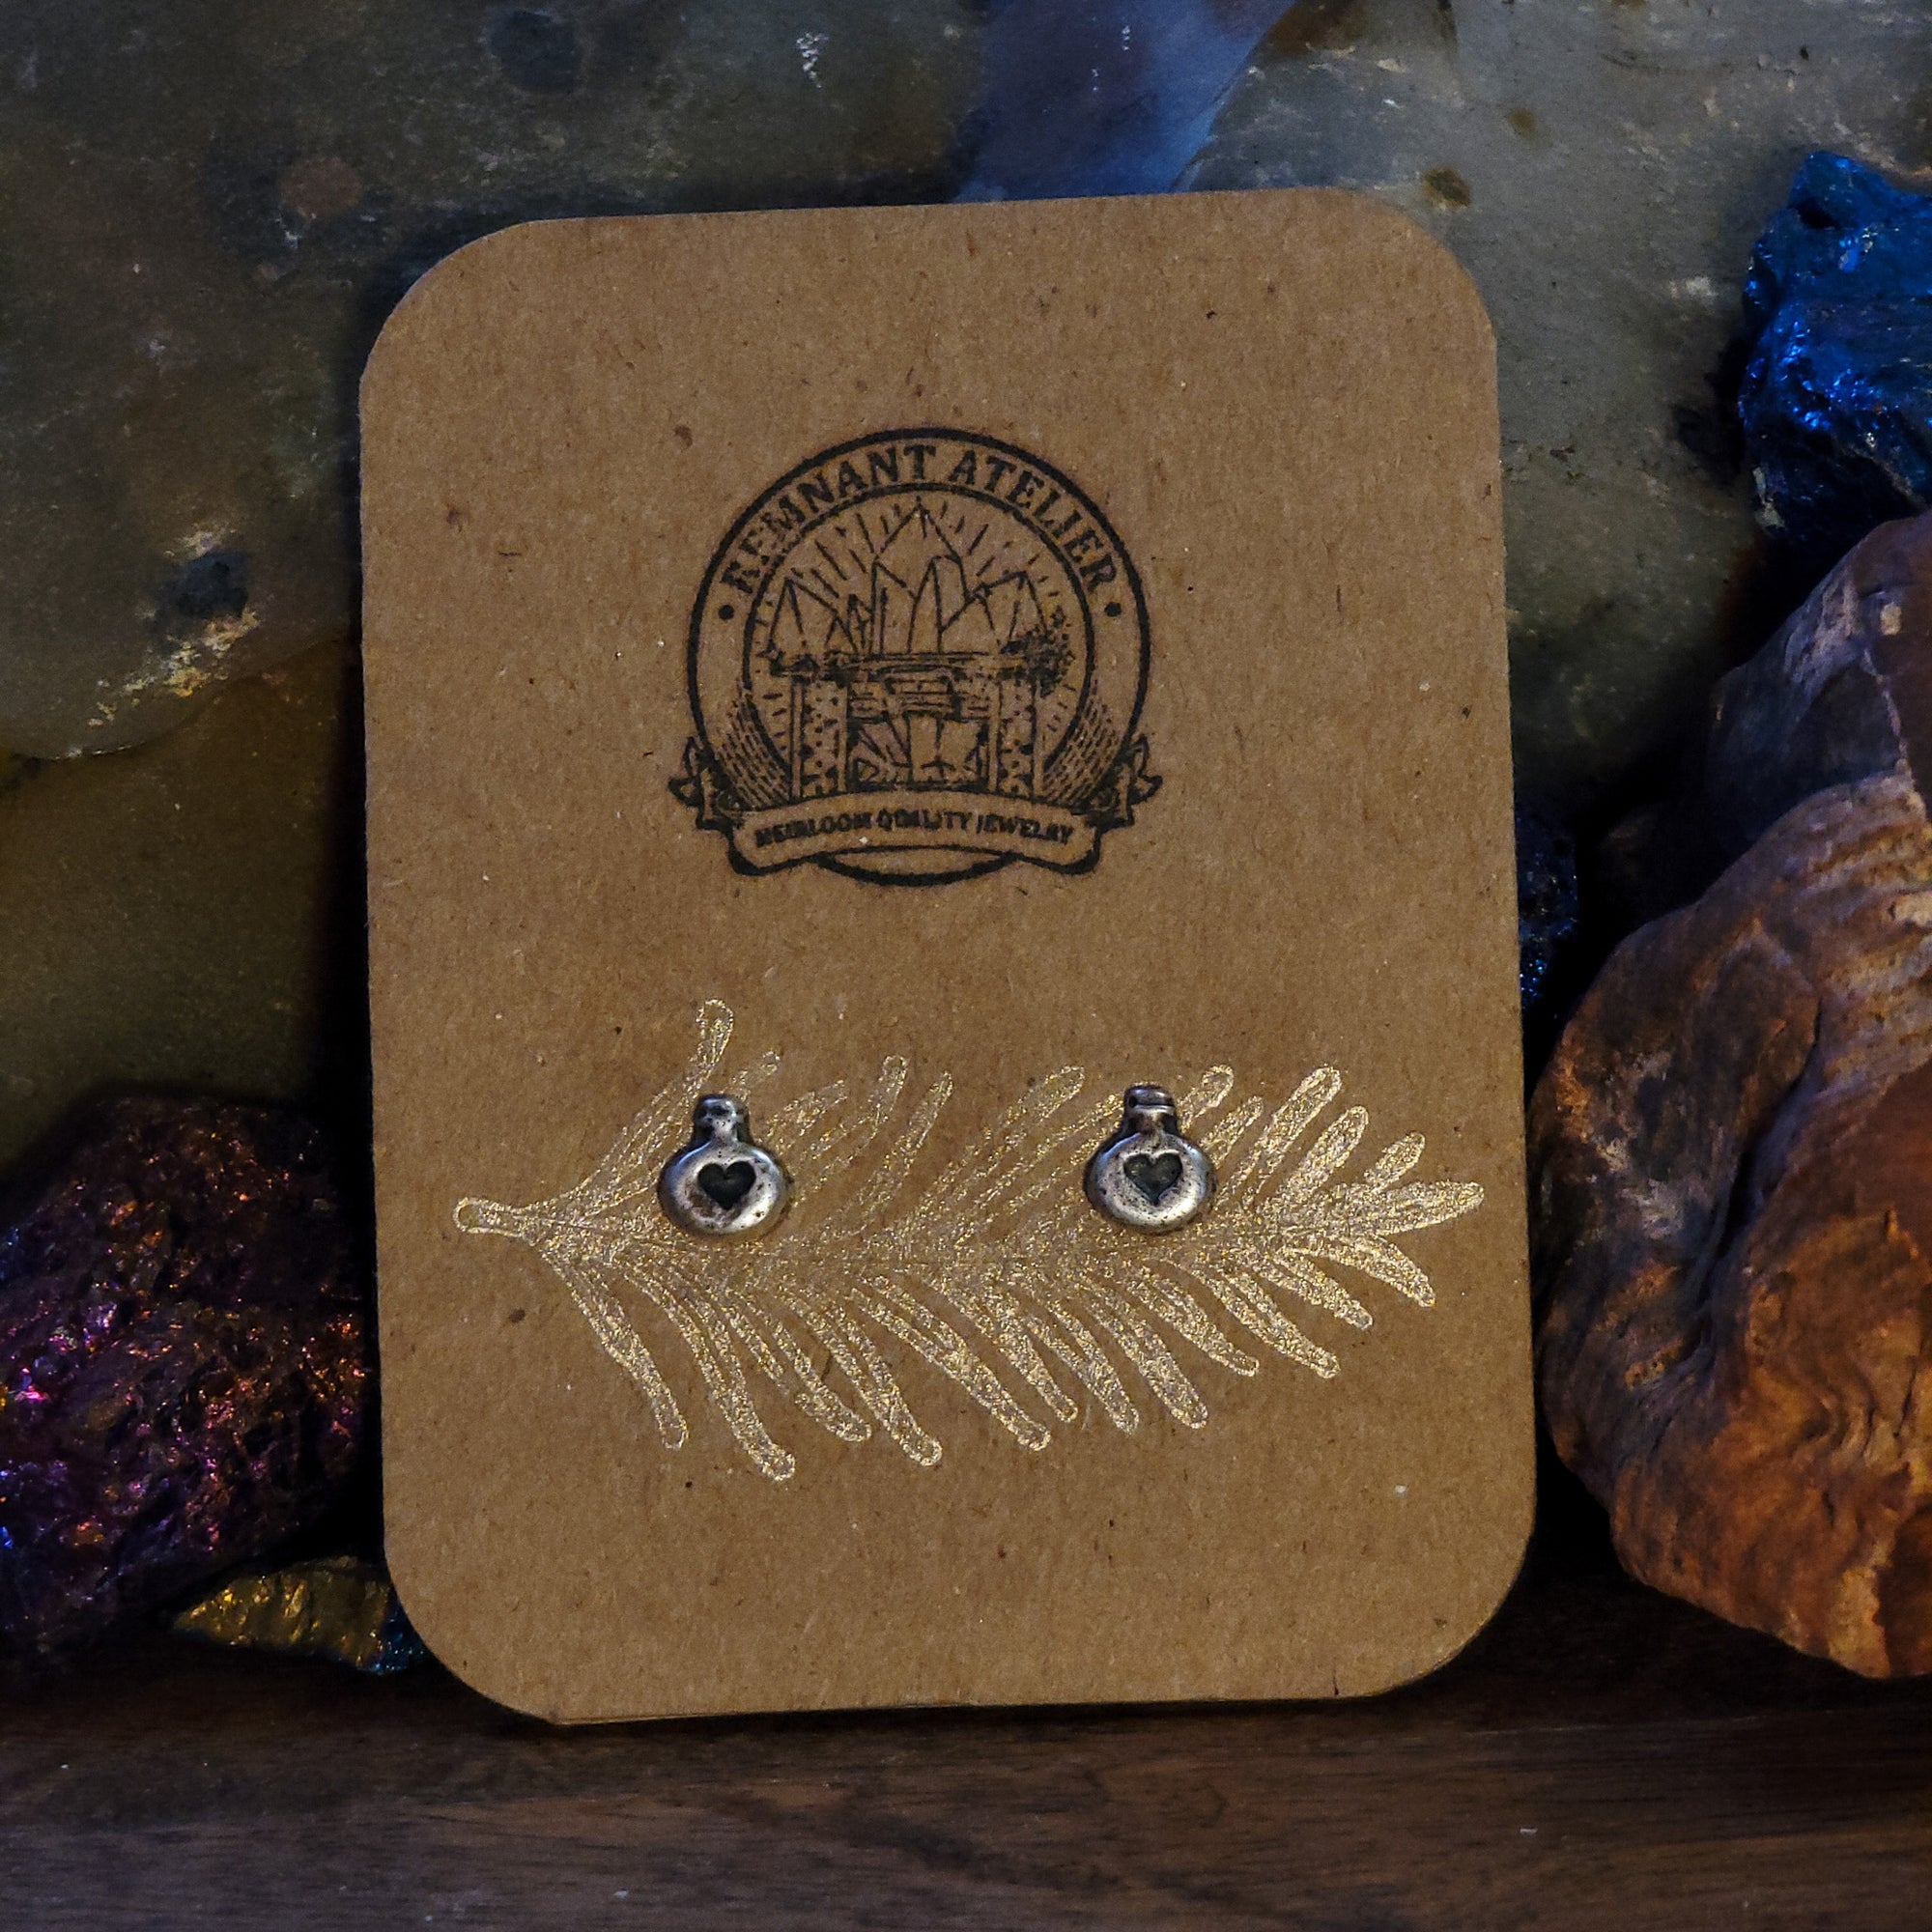 A pair of handmade sterling silver stud earrings in the shape of love potions are displayed on a cardboard earring card, resting upon glittering crystals. A unique and enchanting piece of jewelry perfect for those who believe in the power of love.